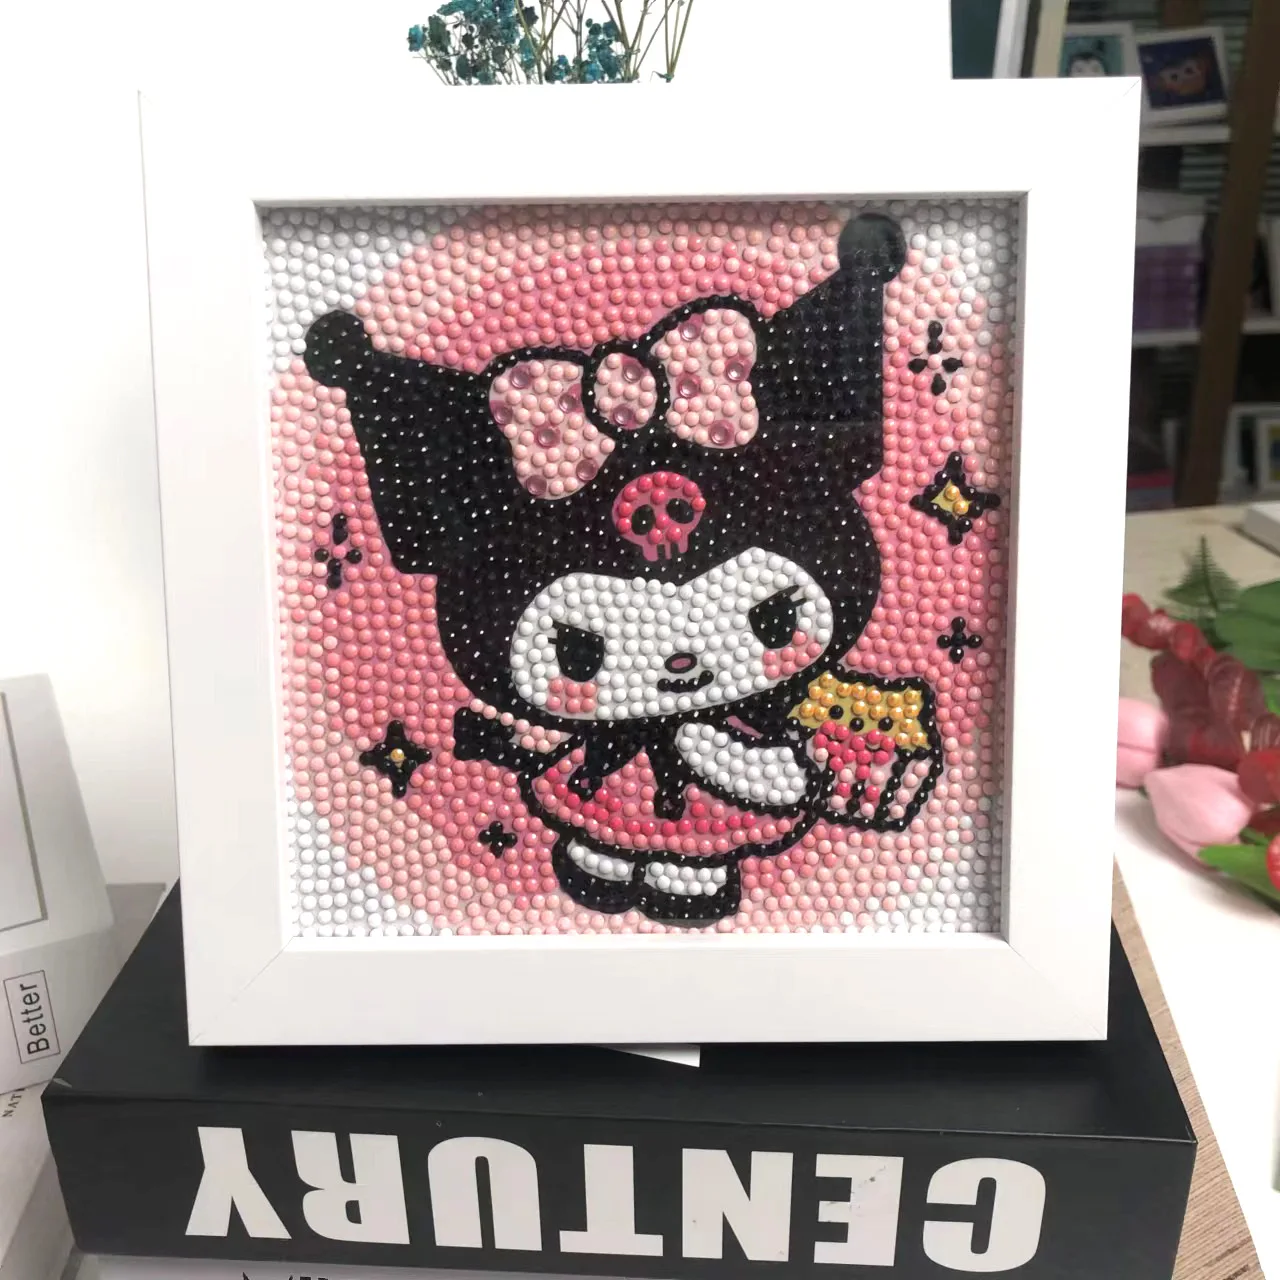 String Art Kits For Kids Ages 8,12 Cartoon Animal Diamond Painting By  Numbers Arts Crafts With LED Lights birthday gifts - AliExpress